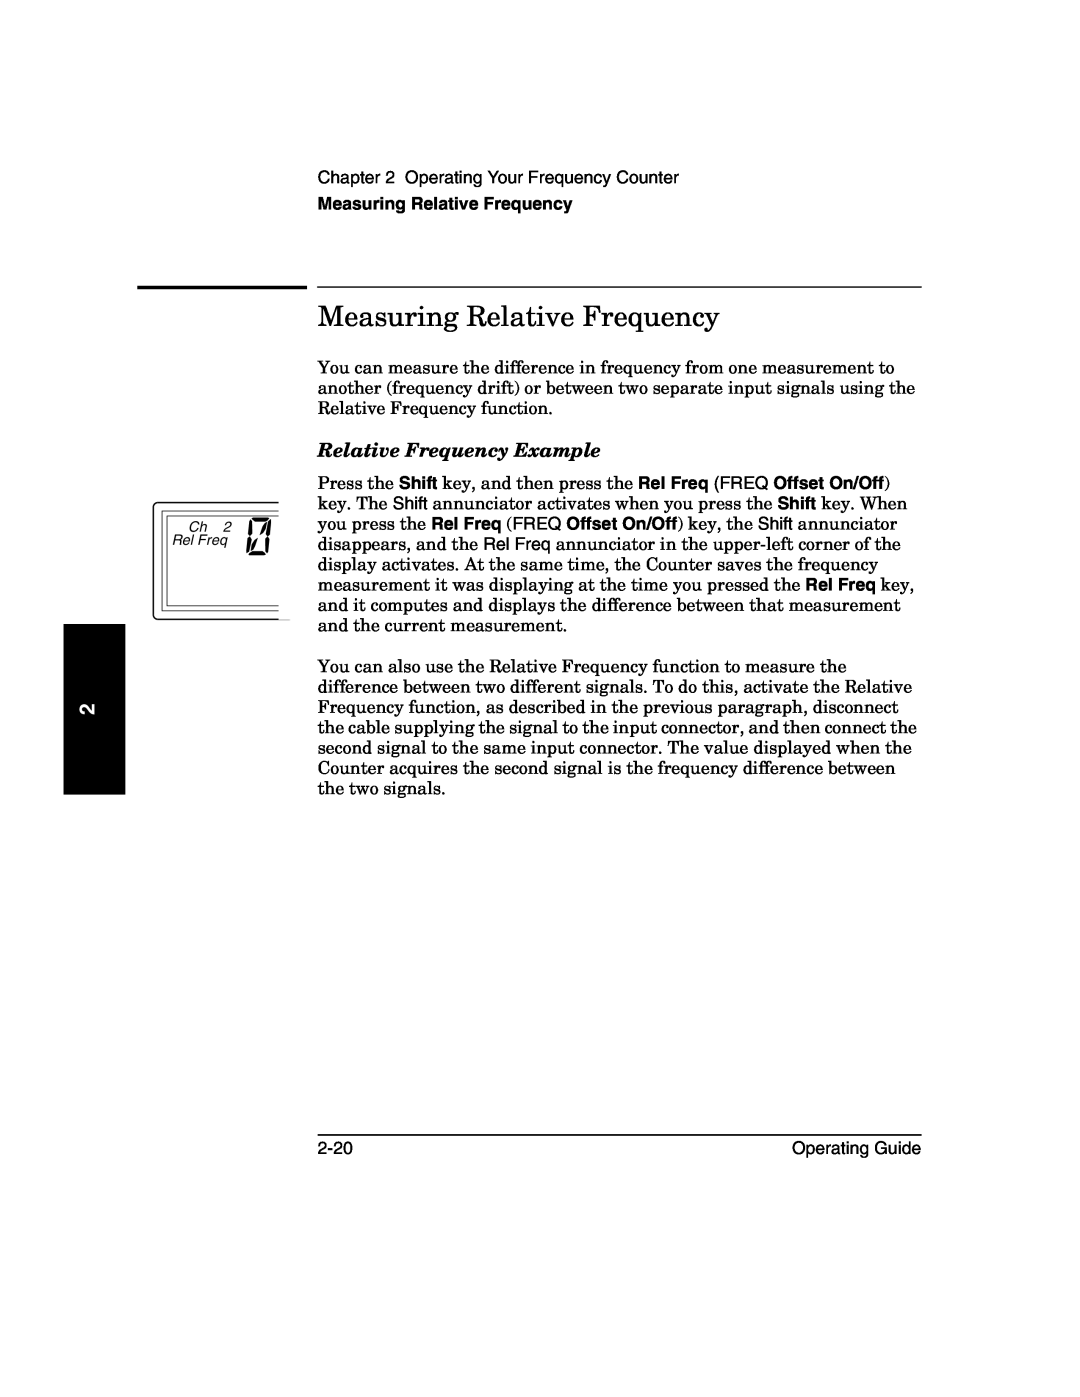 Agilent Technologies 53151A, 53152A, 53150A manual Measuring Relative Frequency, Relative Frequency Example 